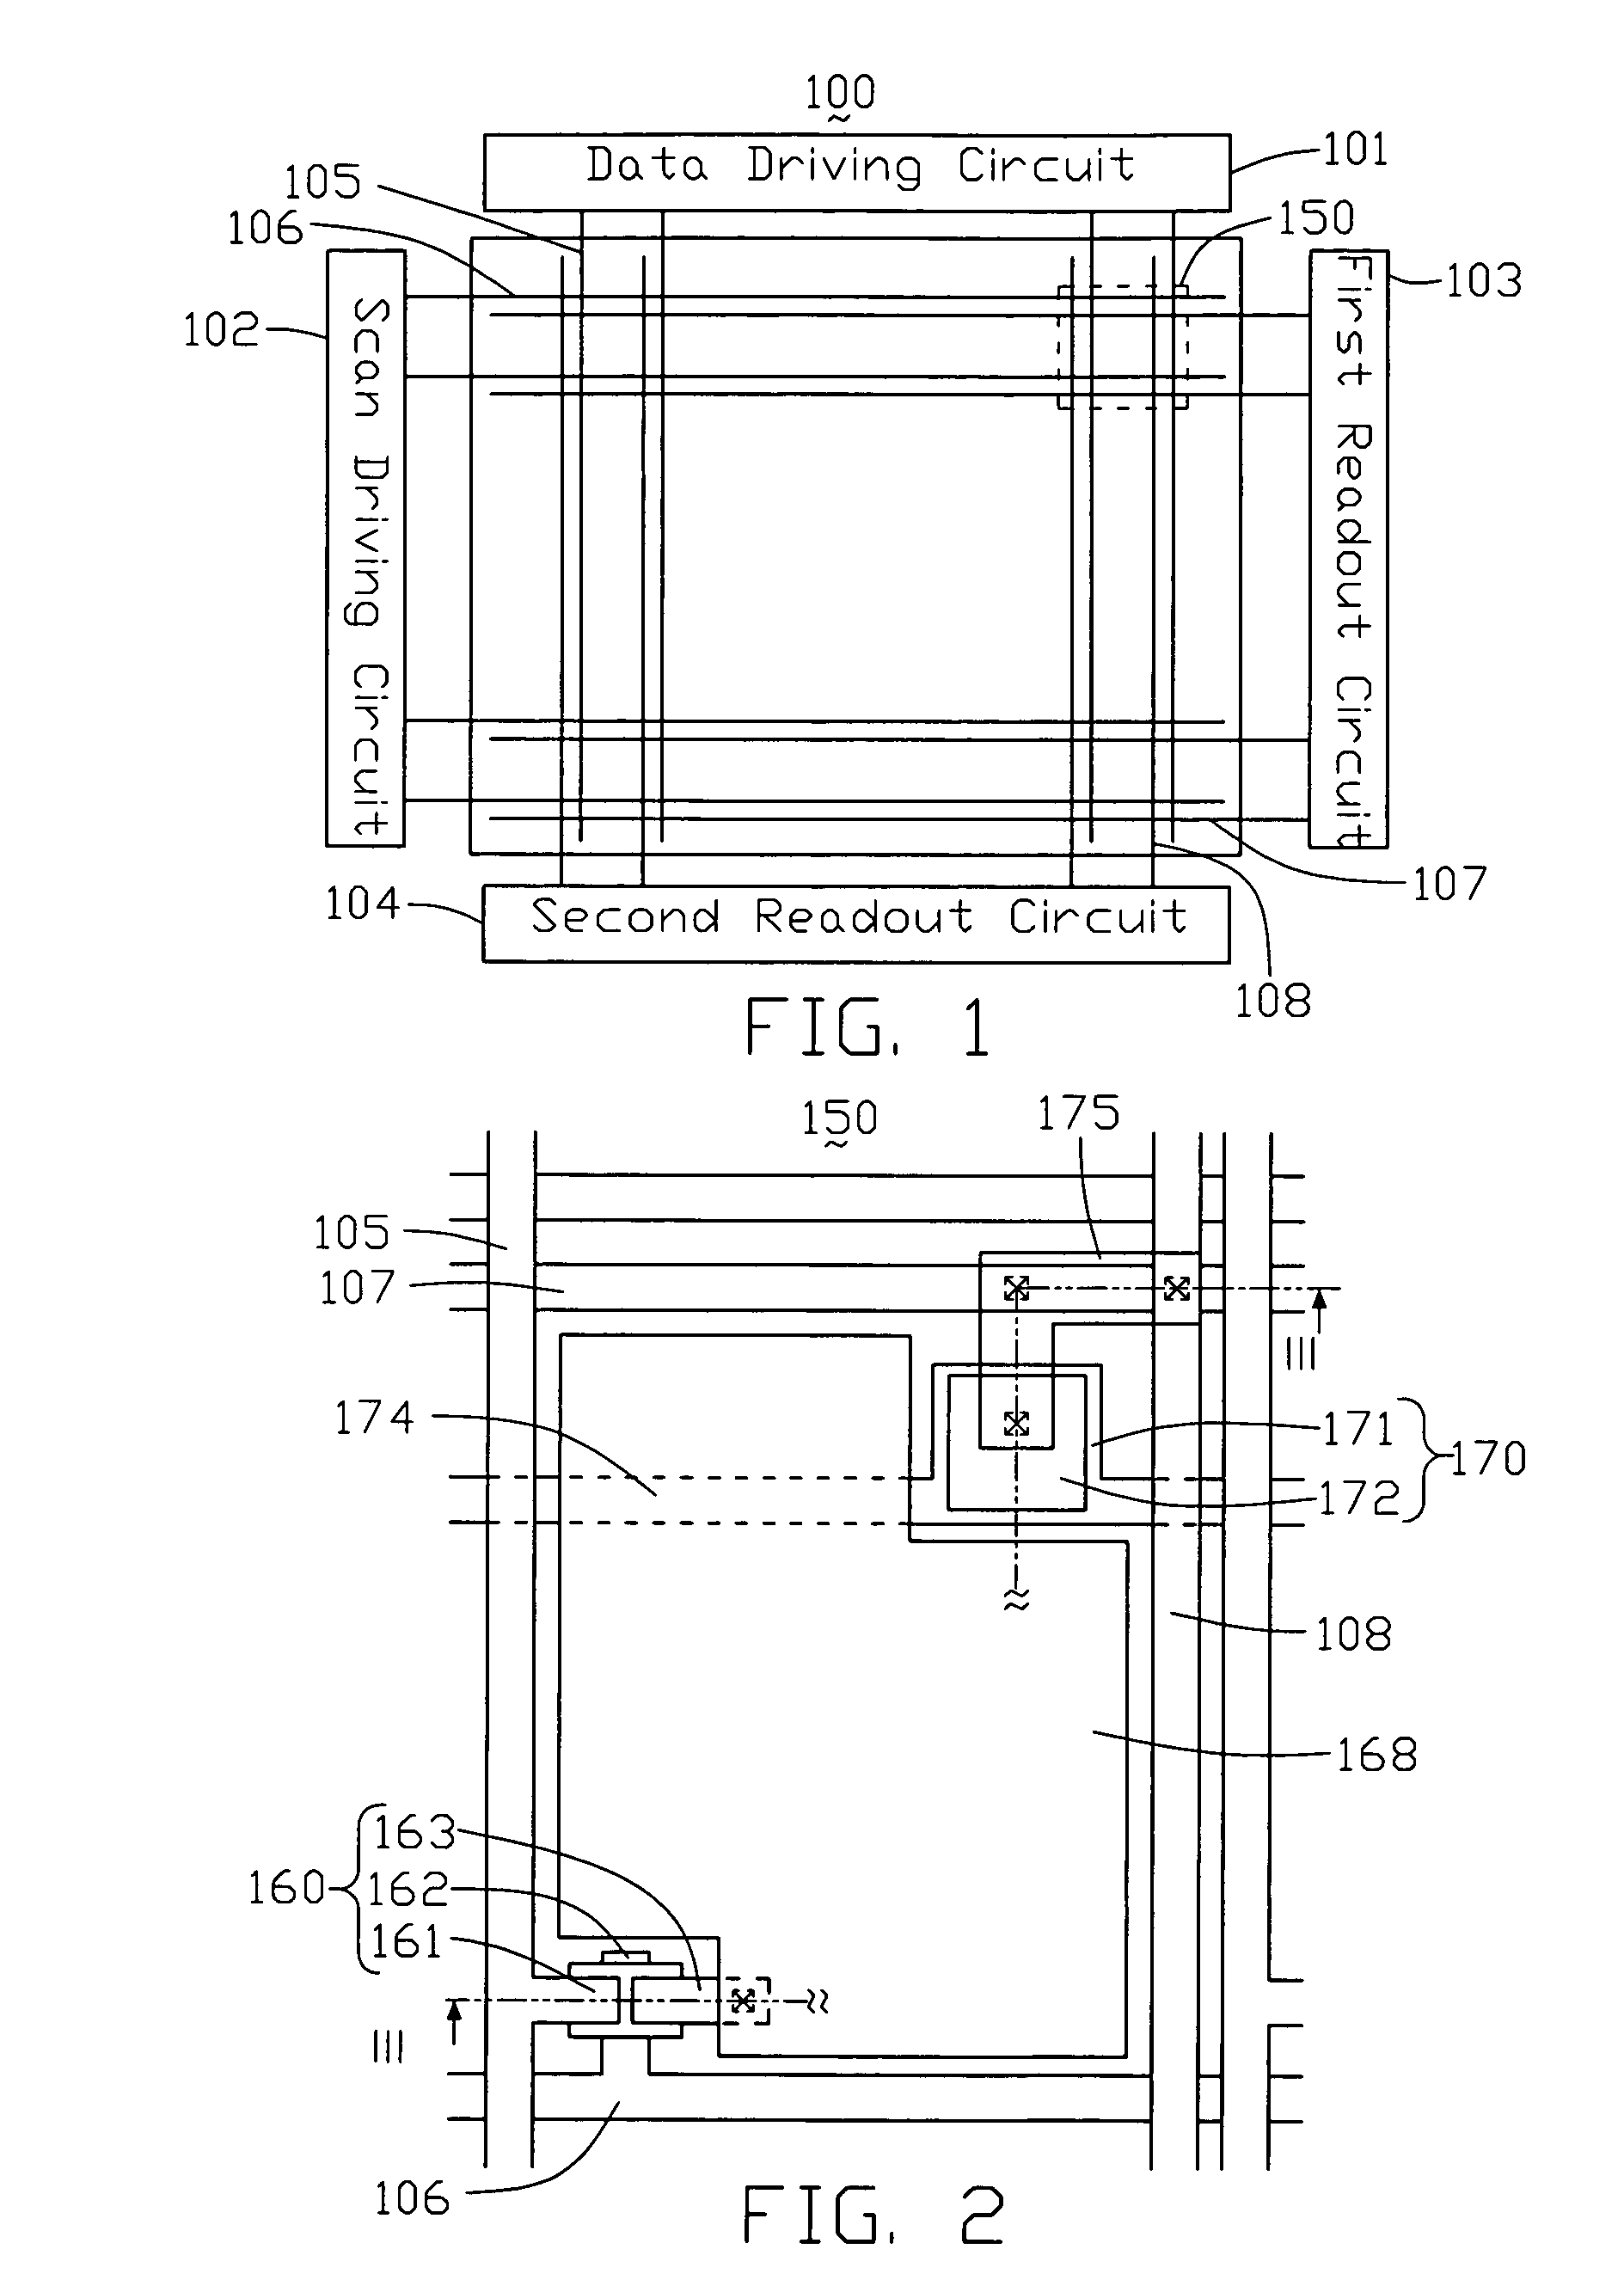 Touch-sensitive liquid crystal display device with built-in touch mechanism